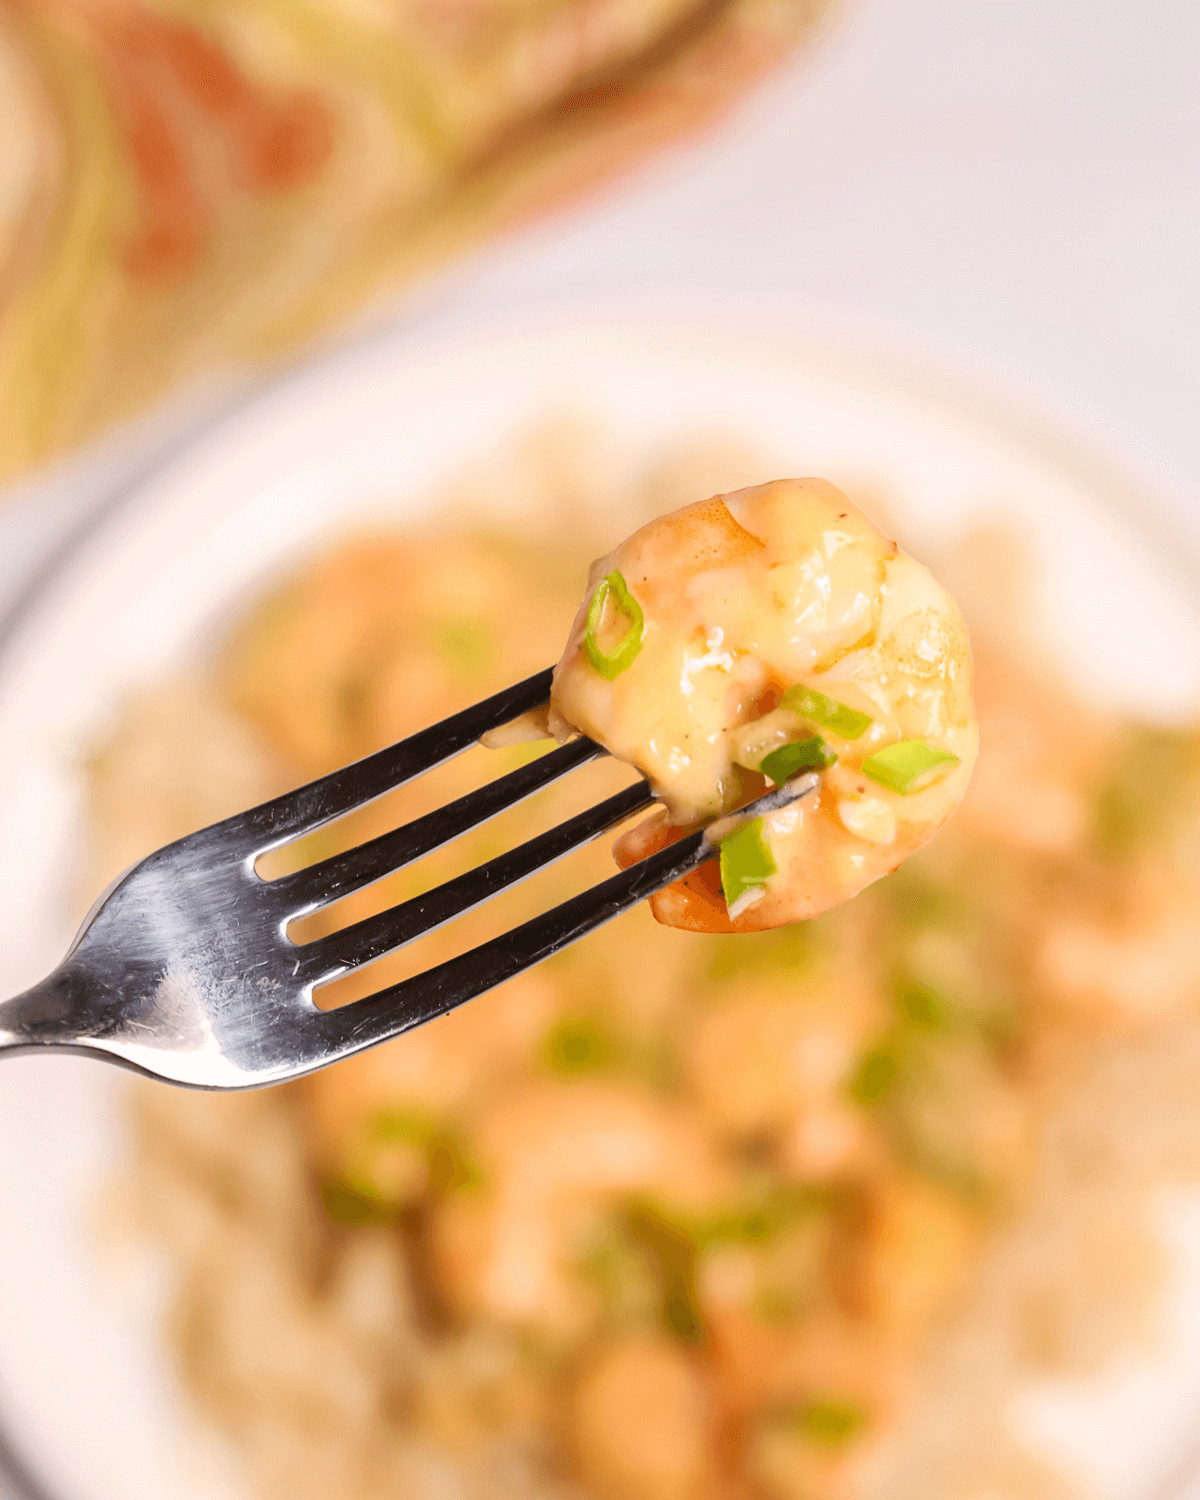 A fork of chopped green onions and creamy sauce.